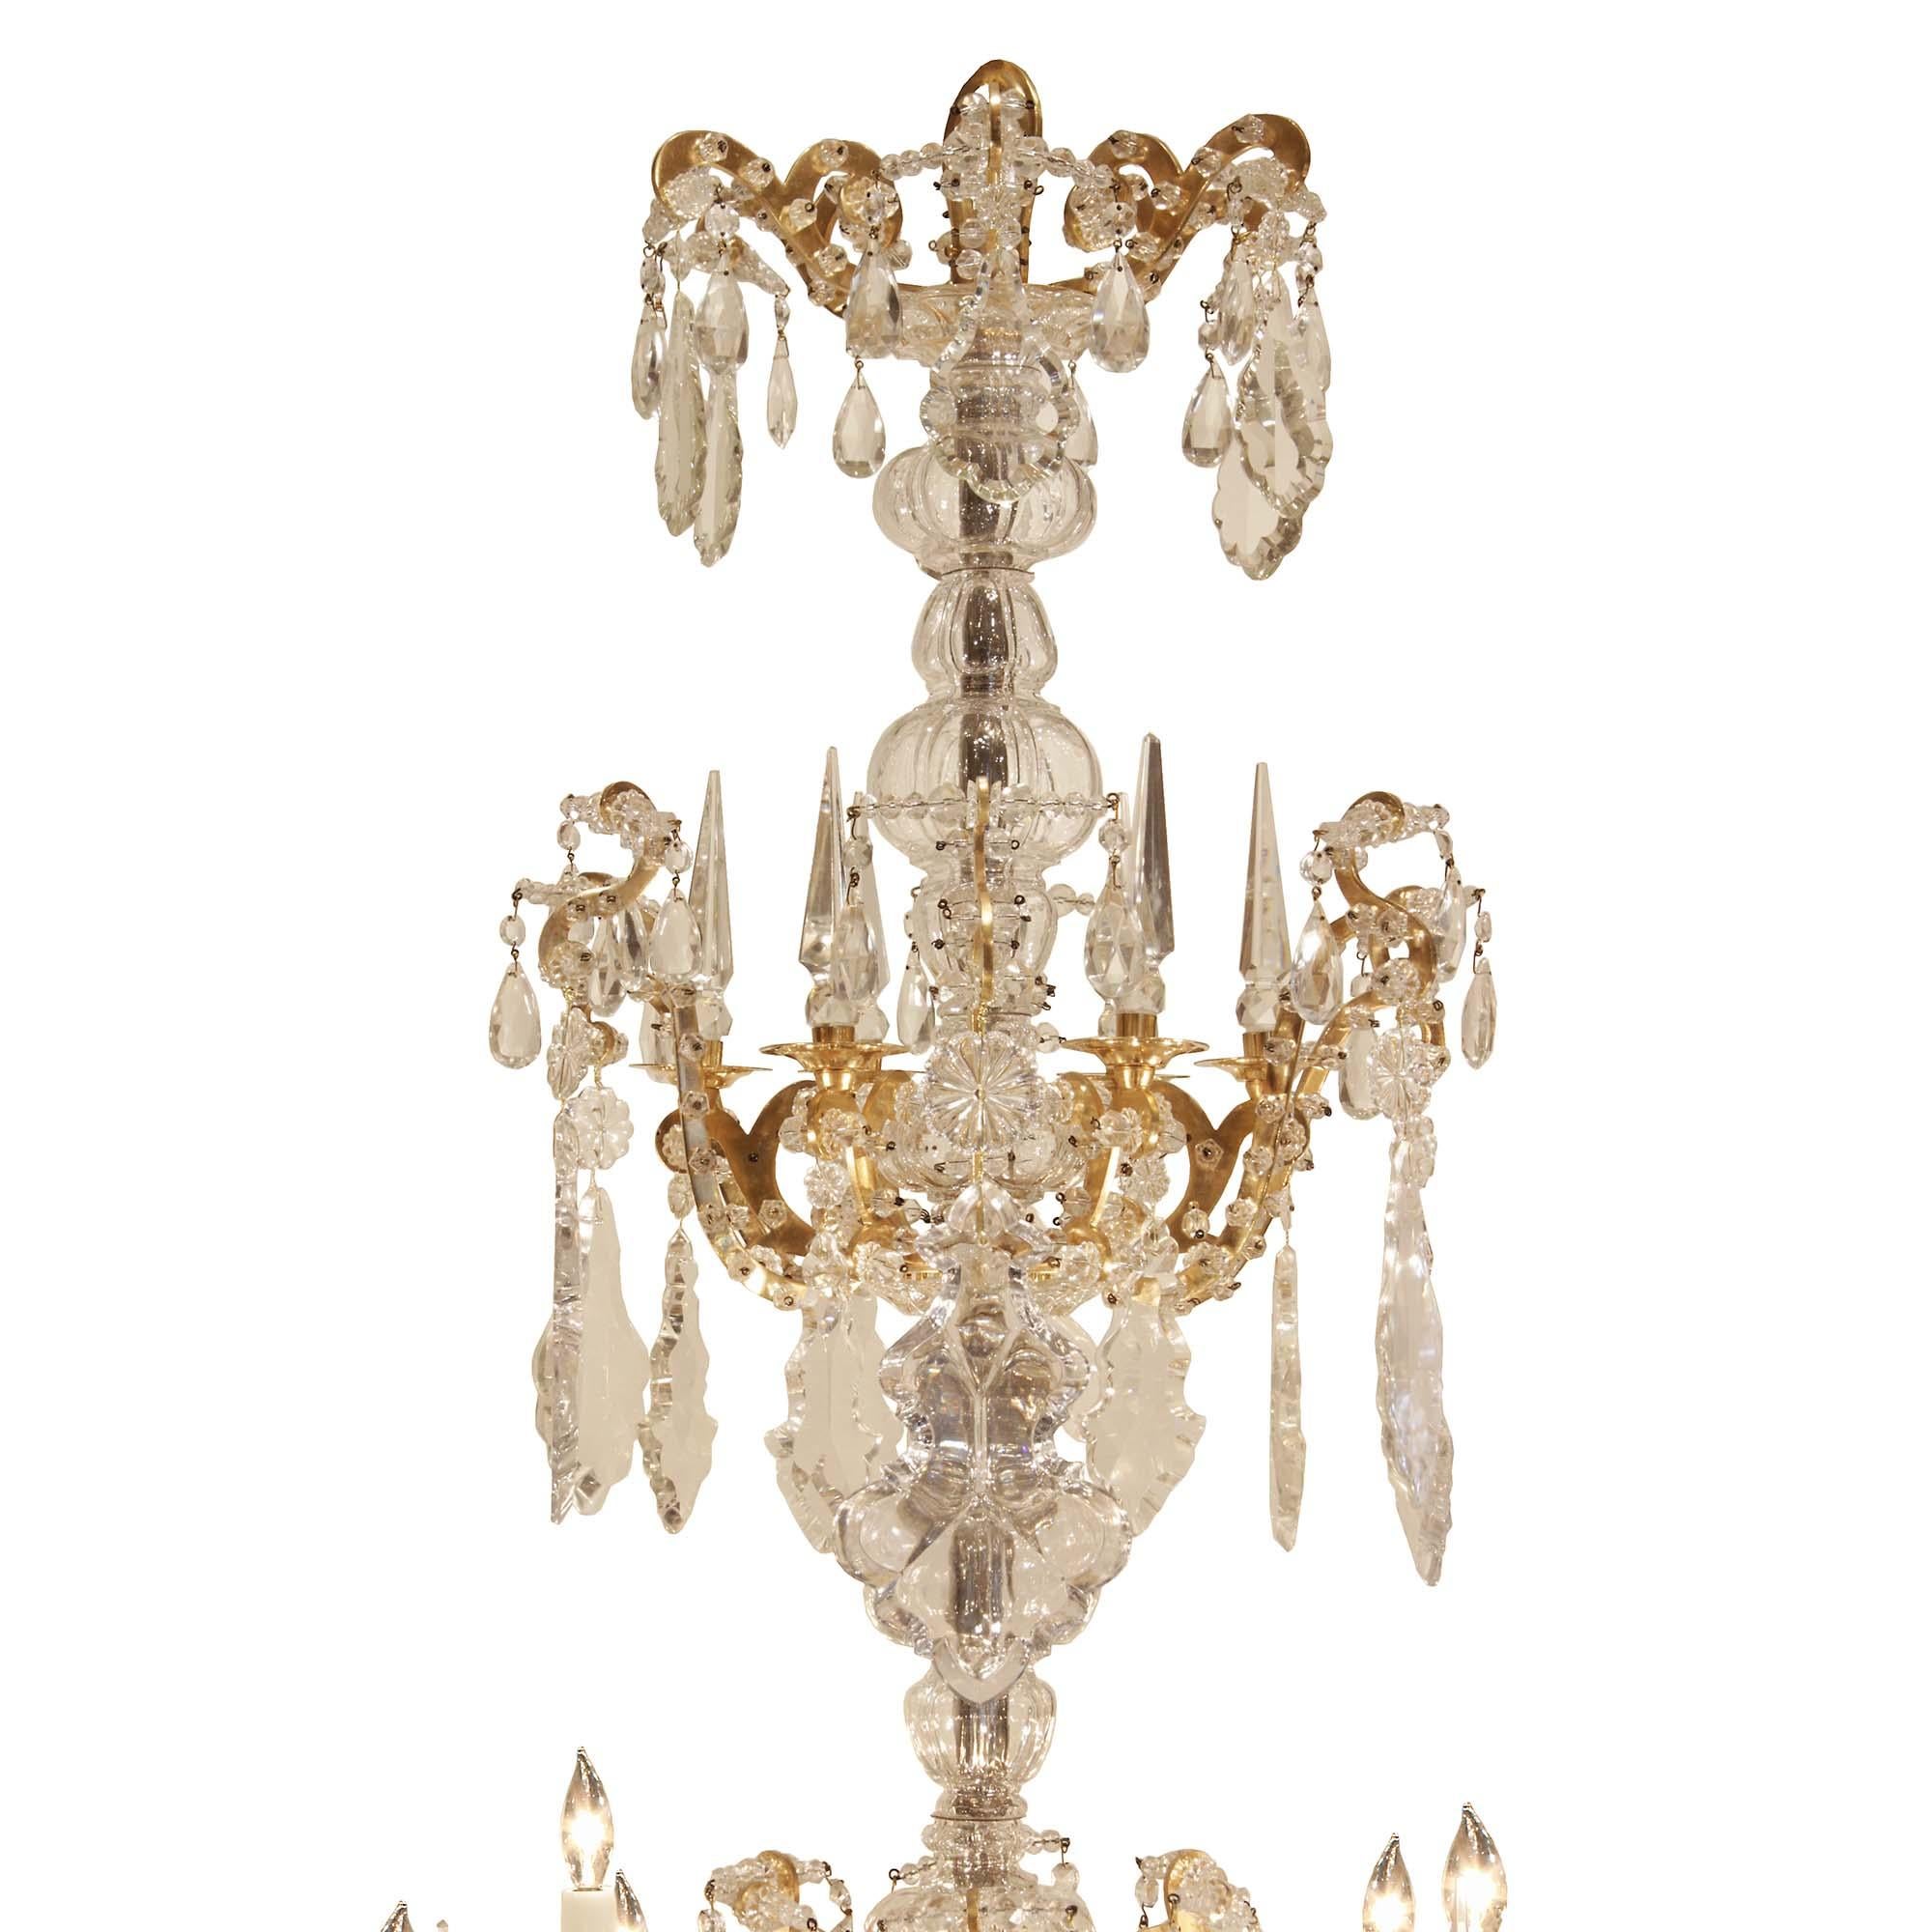 A spectacular and monumental French 19th century Louis XV st. Baccarat crystal chandelier. This chandelier has a central crystal ball hanging from a crystal base, below six elaborately scrolled arms that end in three cut crystal candelcups each, and